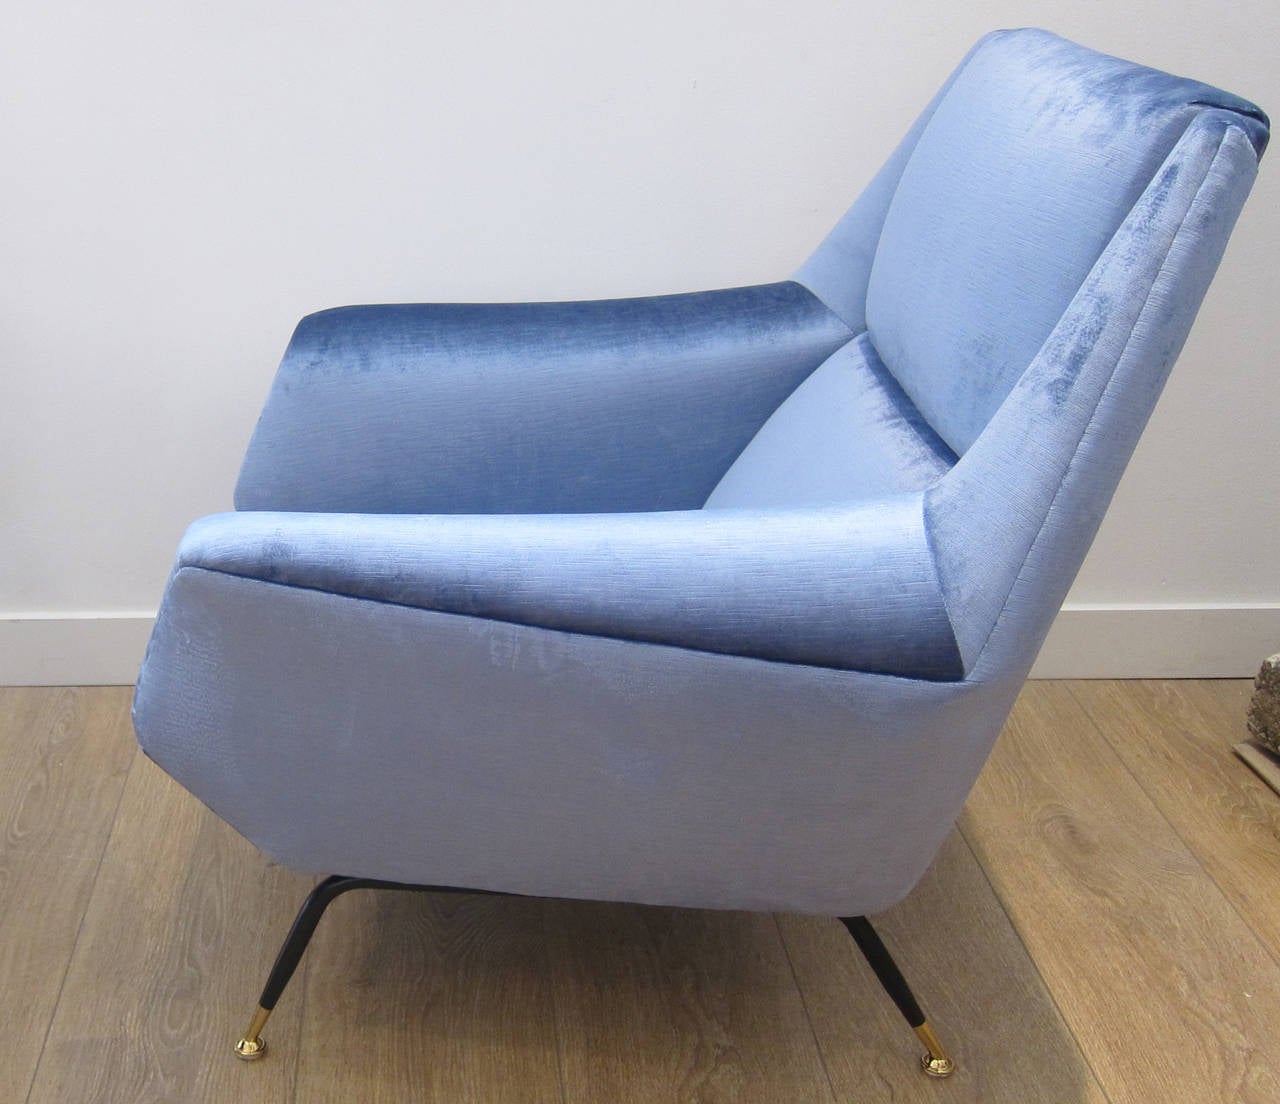 Mid-20th Century Pair of Faceted Form Lounge Chairs, Italy, 1950s